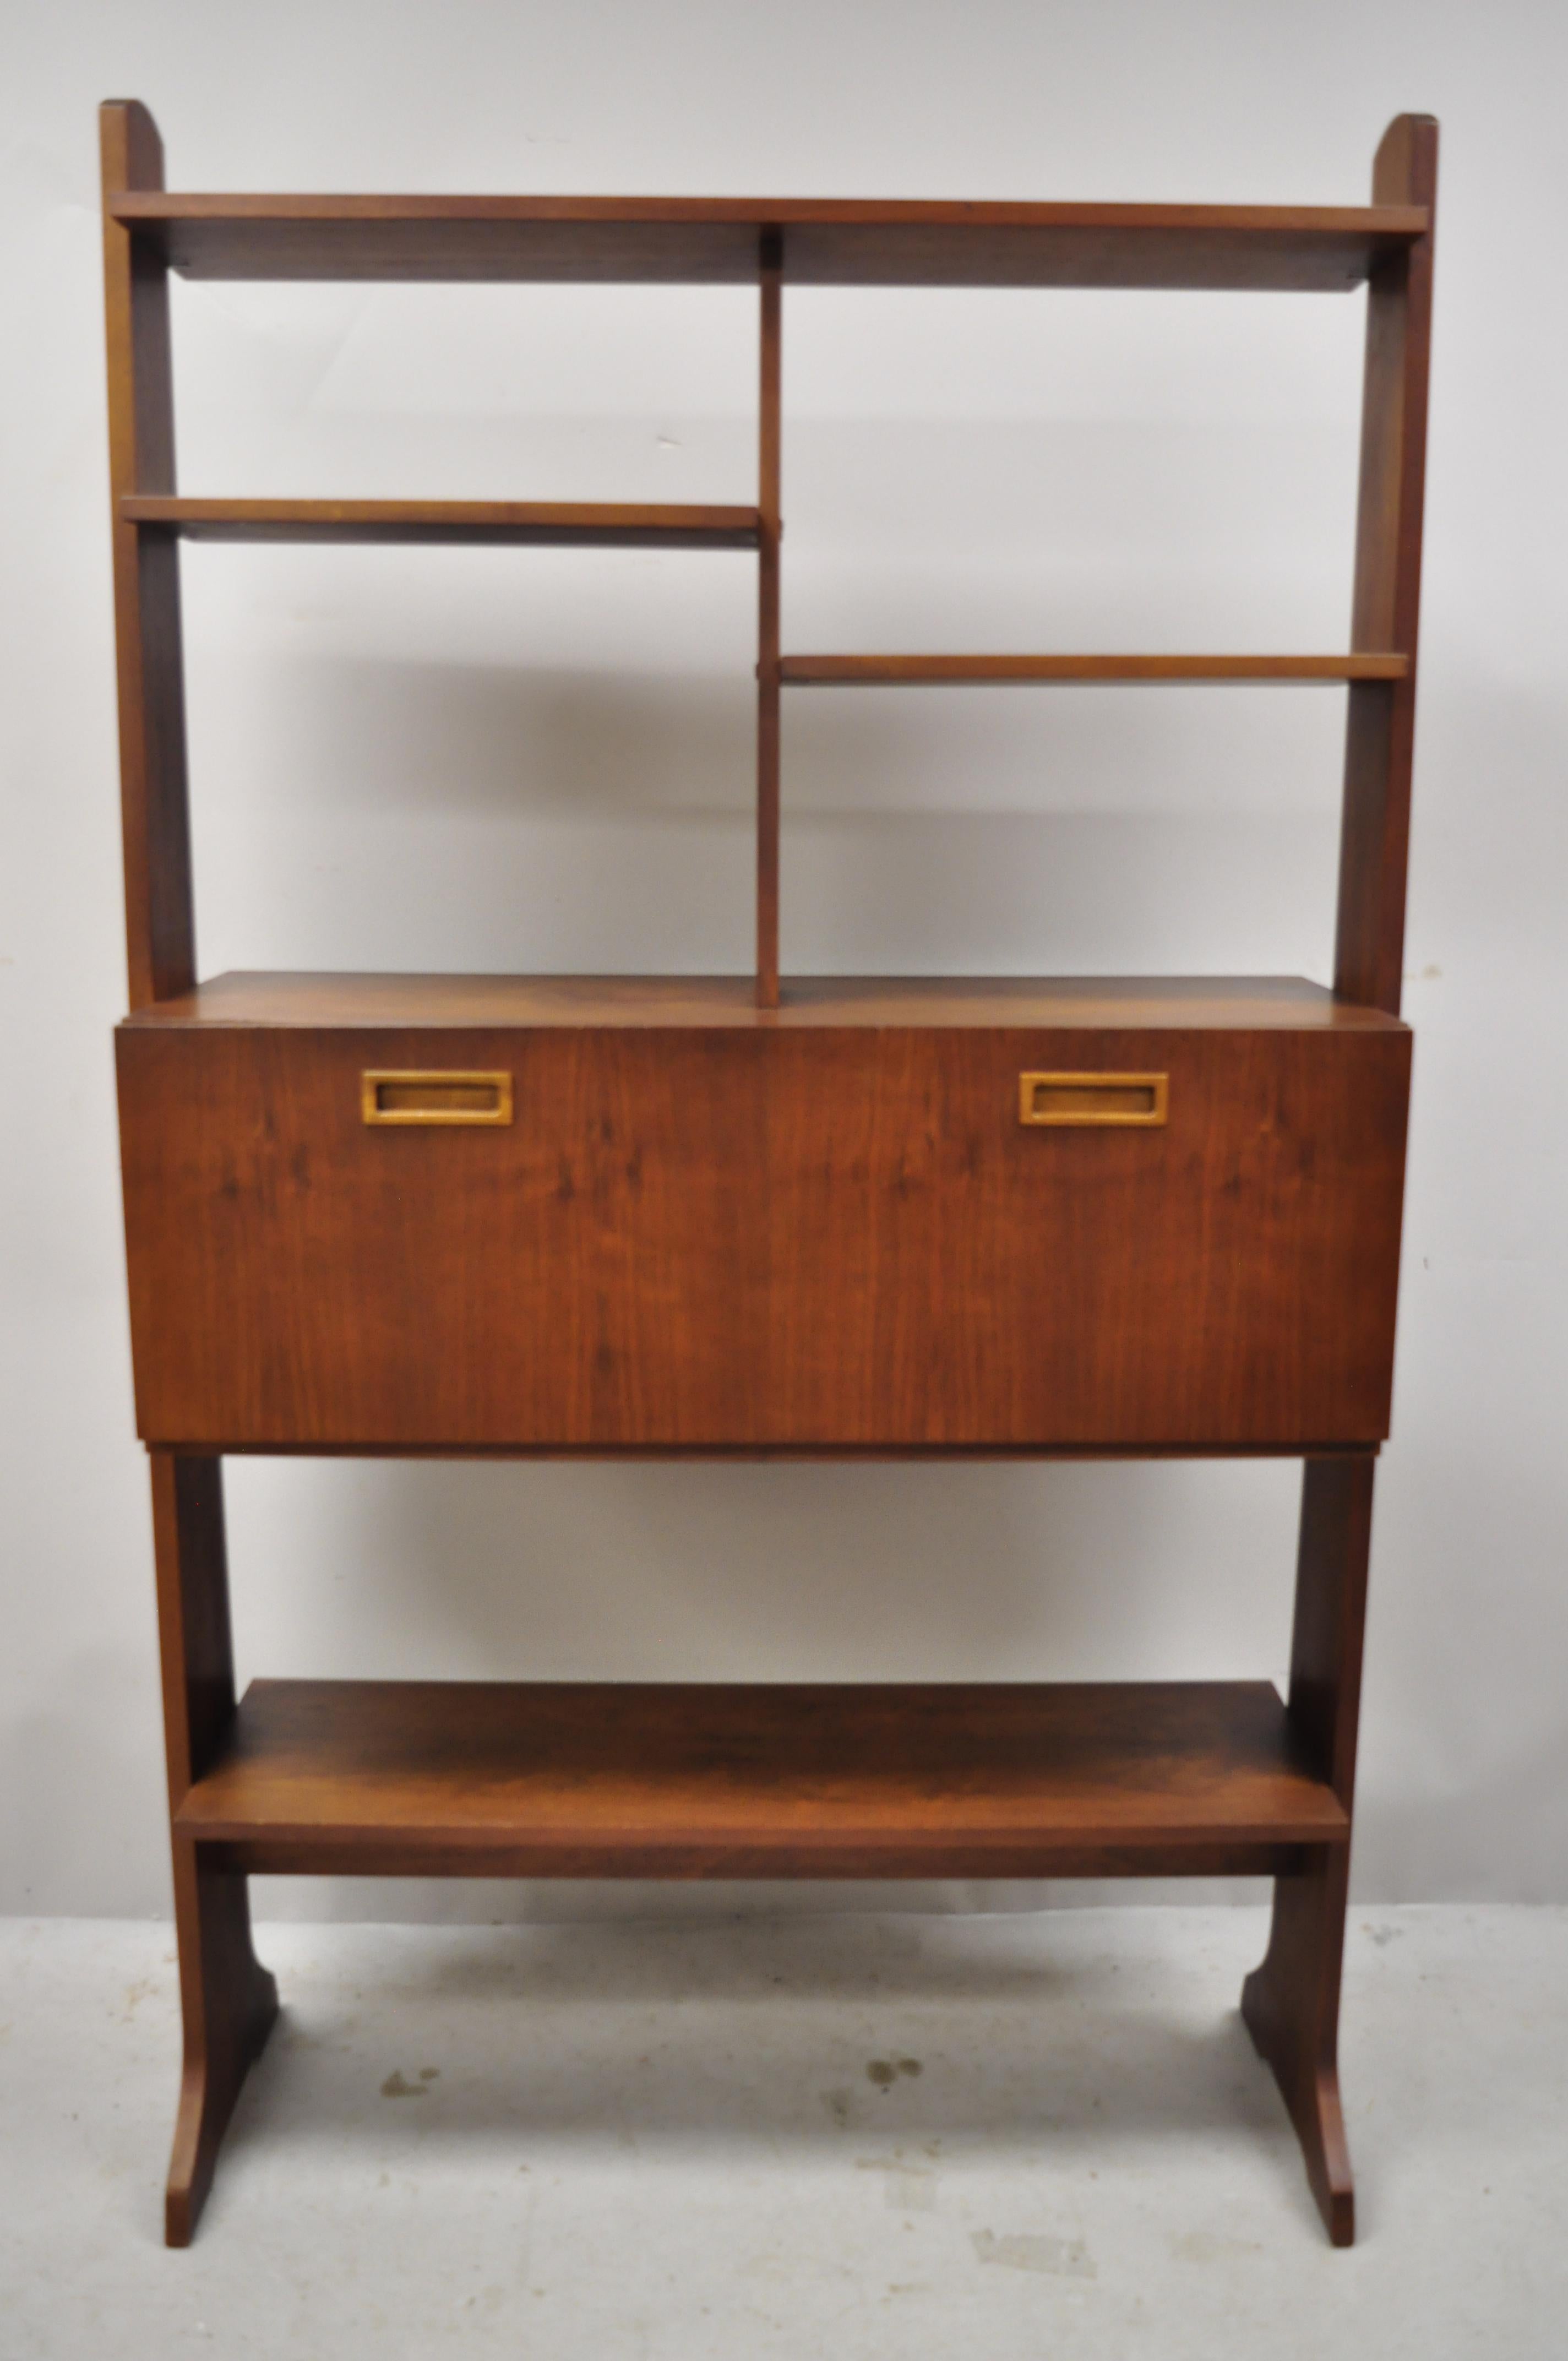 Vintage midcentury Danish modern teak wall unit bookcase display cabinet. Item features 1 fall front door, desk fitted interior, sculpted wood pulls, beautiful wood grain, finished back, very nice vintage item, sleek sculptural form,
circa mid-20th